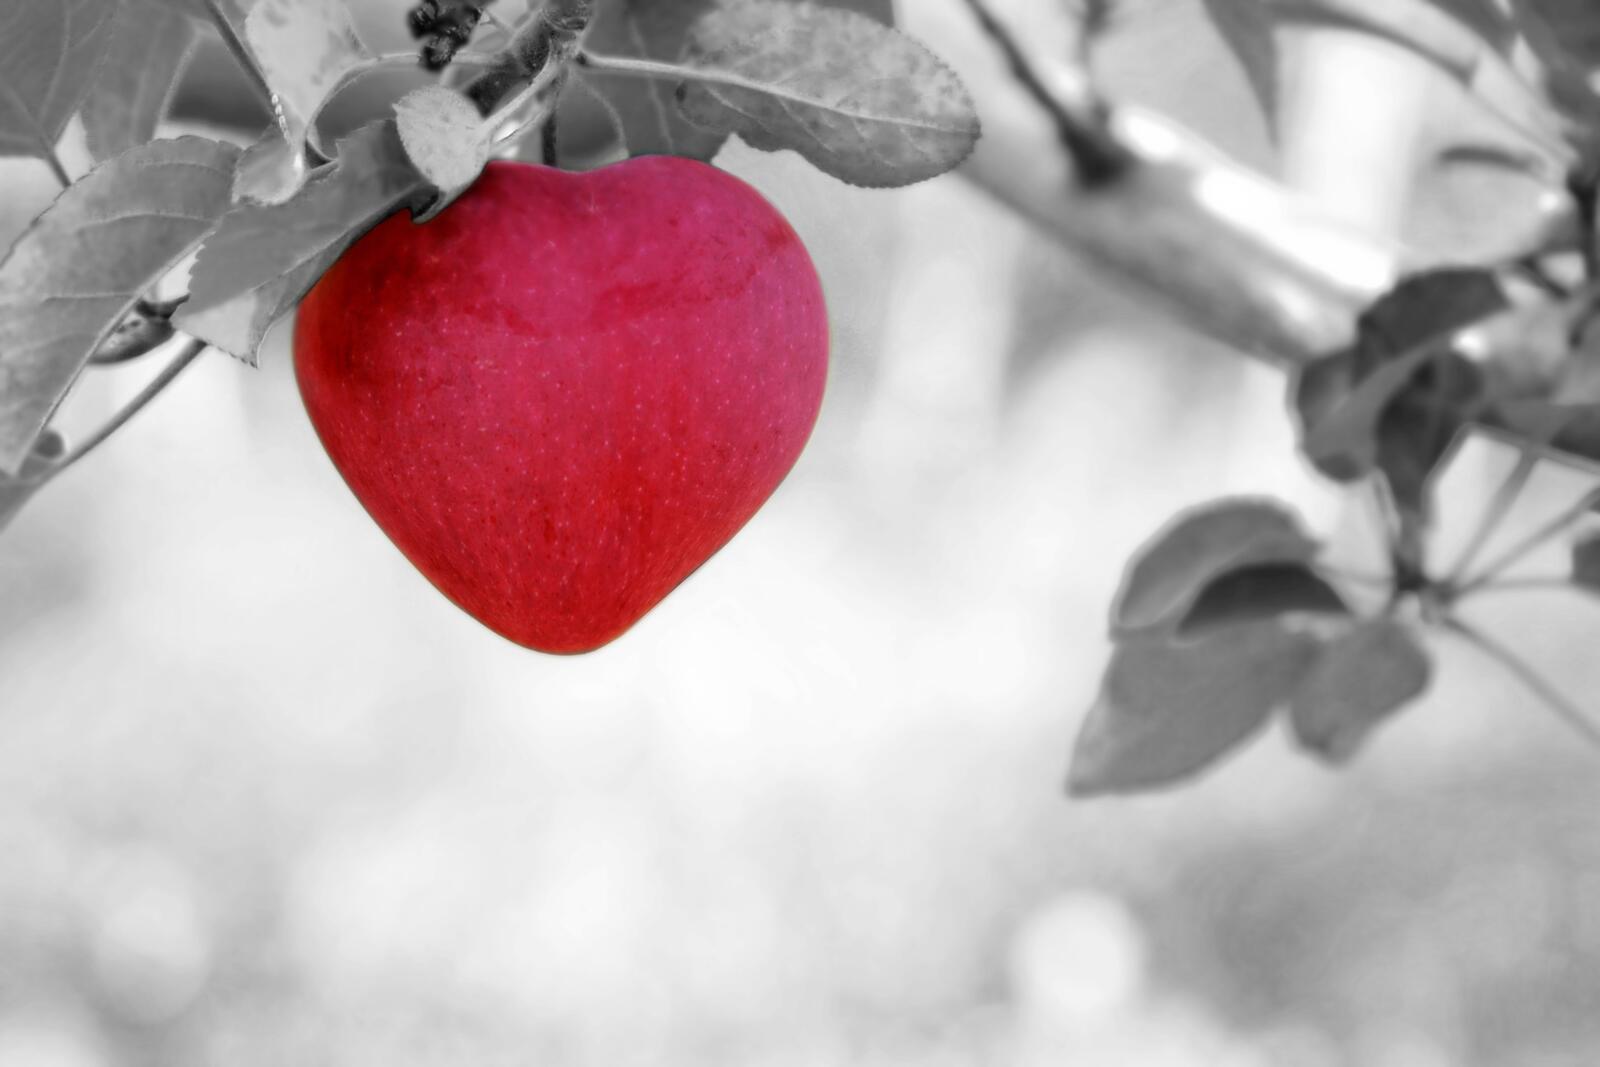 Free photo A red apple in the shape of a heart